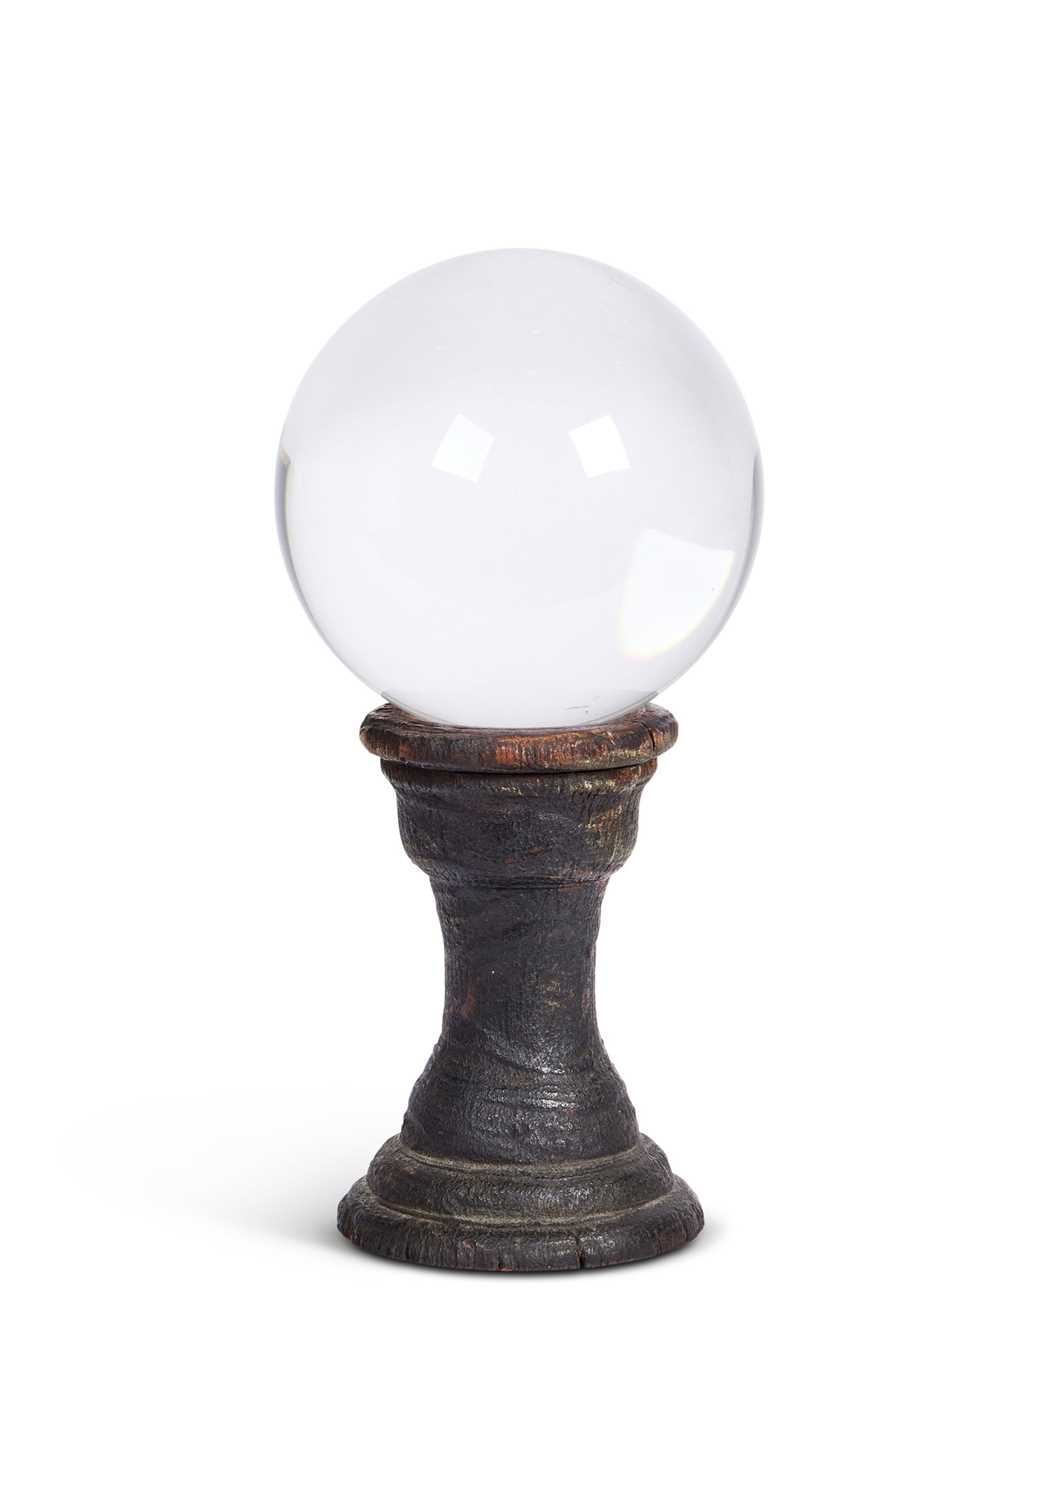 A FORTUNE TELLER'S CRYSTAL BALL